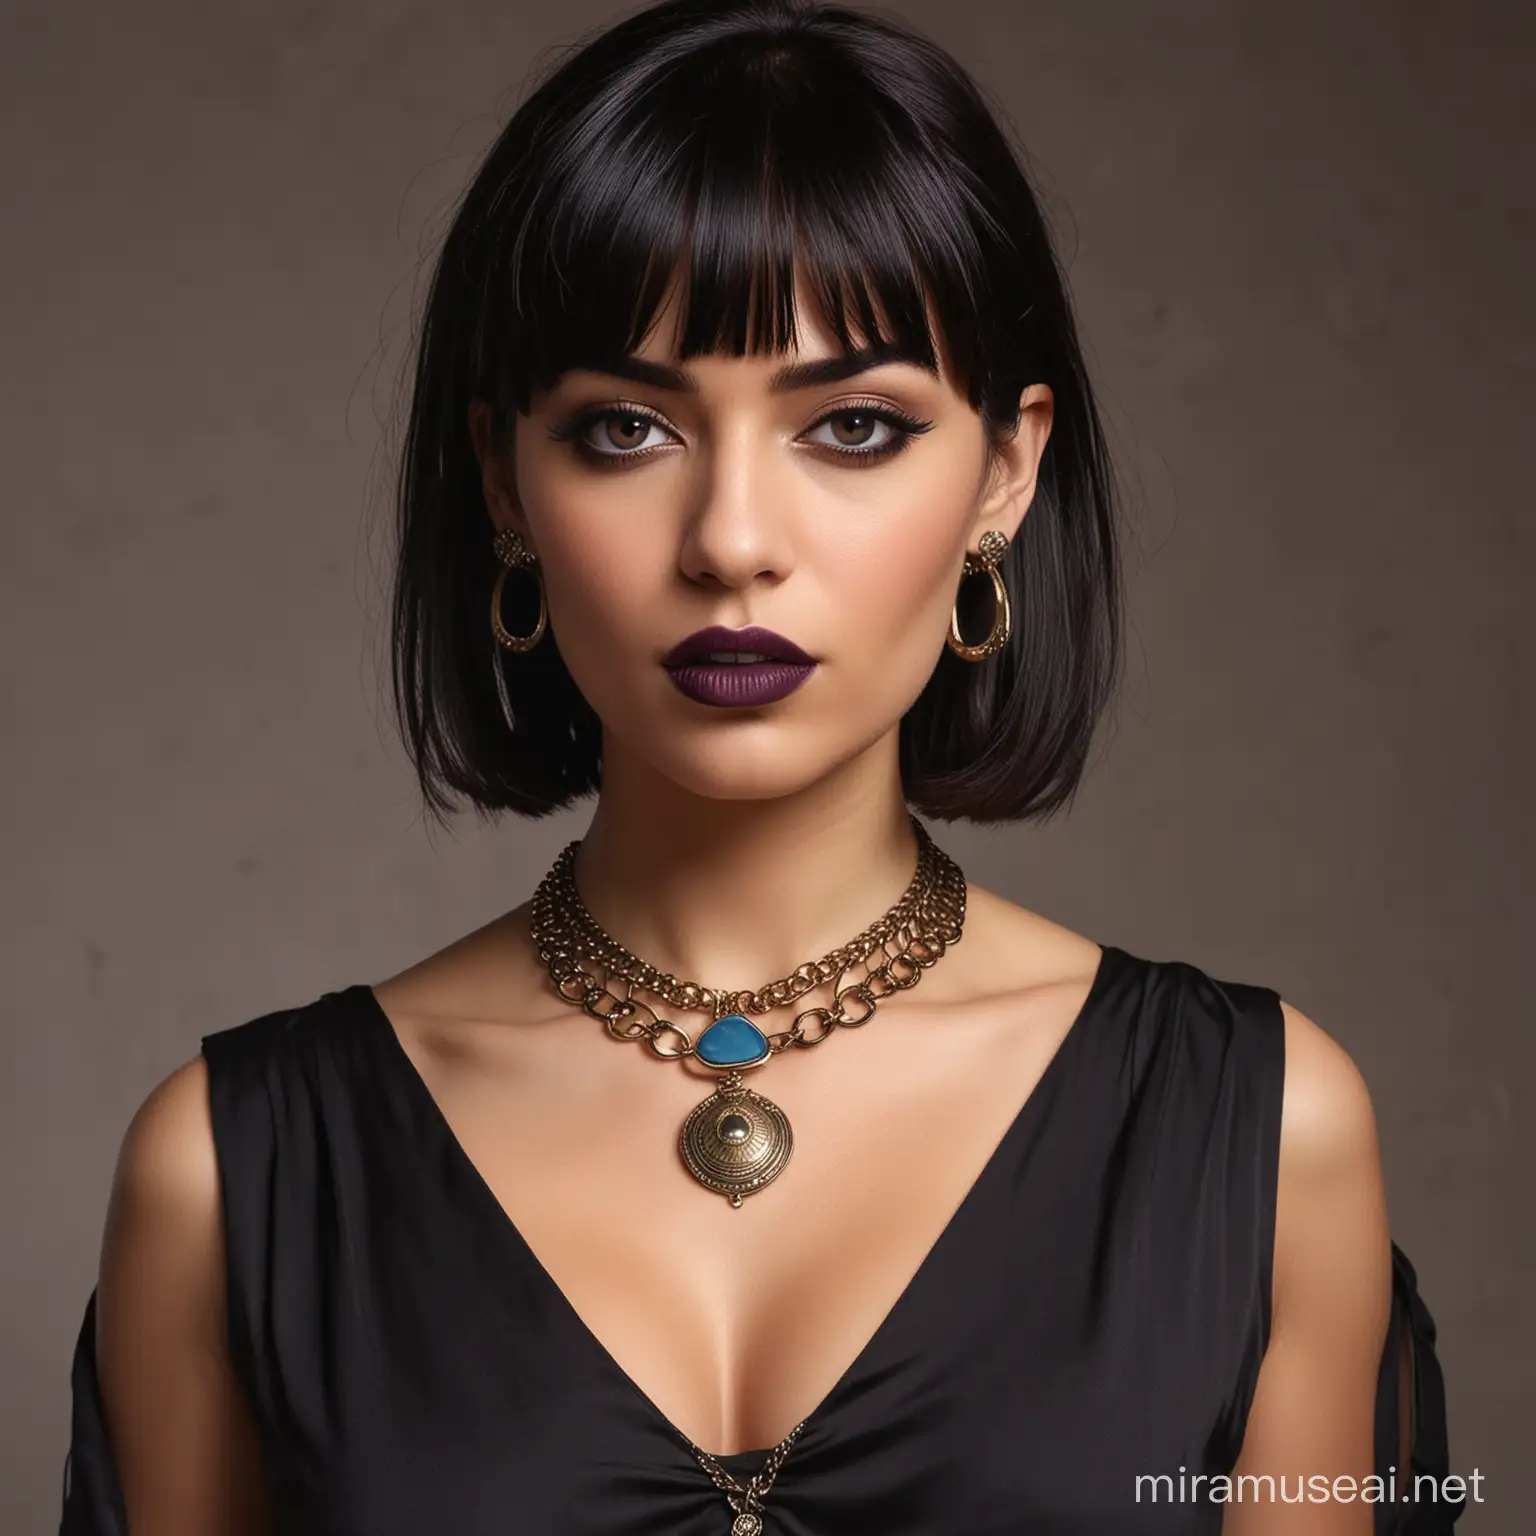 A French female detective with Egyptian features, with dark bob hair and bangs, She is wearing a low cut blouse ,  She has a piercing with an obsidian set in his left nostril, She has two large hoop earrings, She has a necklace with an Ank as a pendant, She has dark and thin eyes, short, plump lips with dark purple lipstick